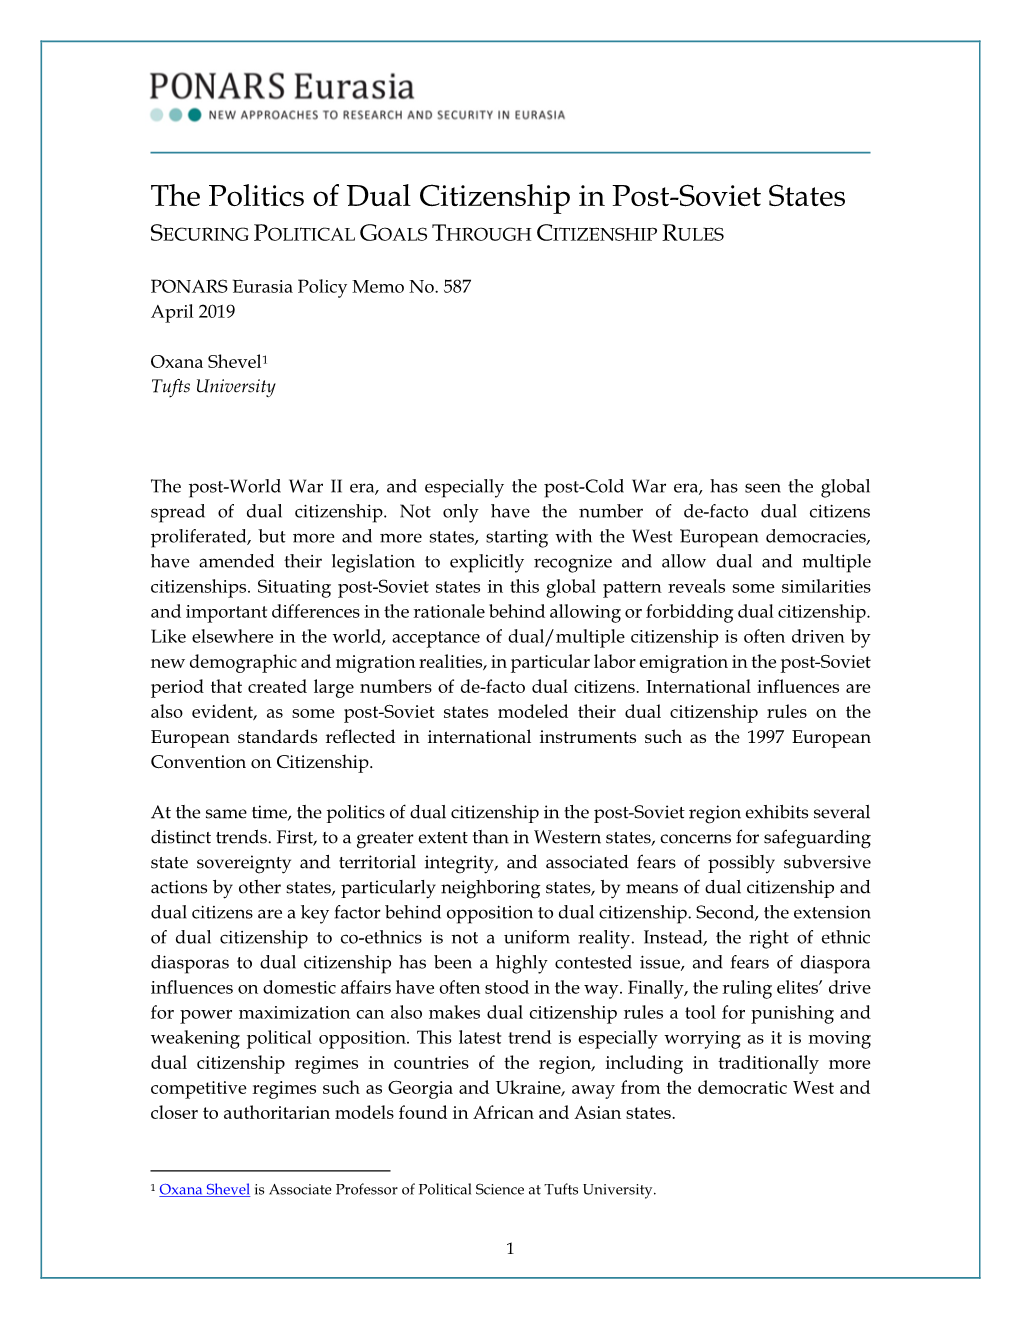 The Politics of Dual Citizenship in Post-Soviet States SECURING POLITICAL GOALS THROUGH CITIZENSHIP RULES